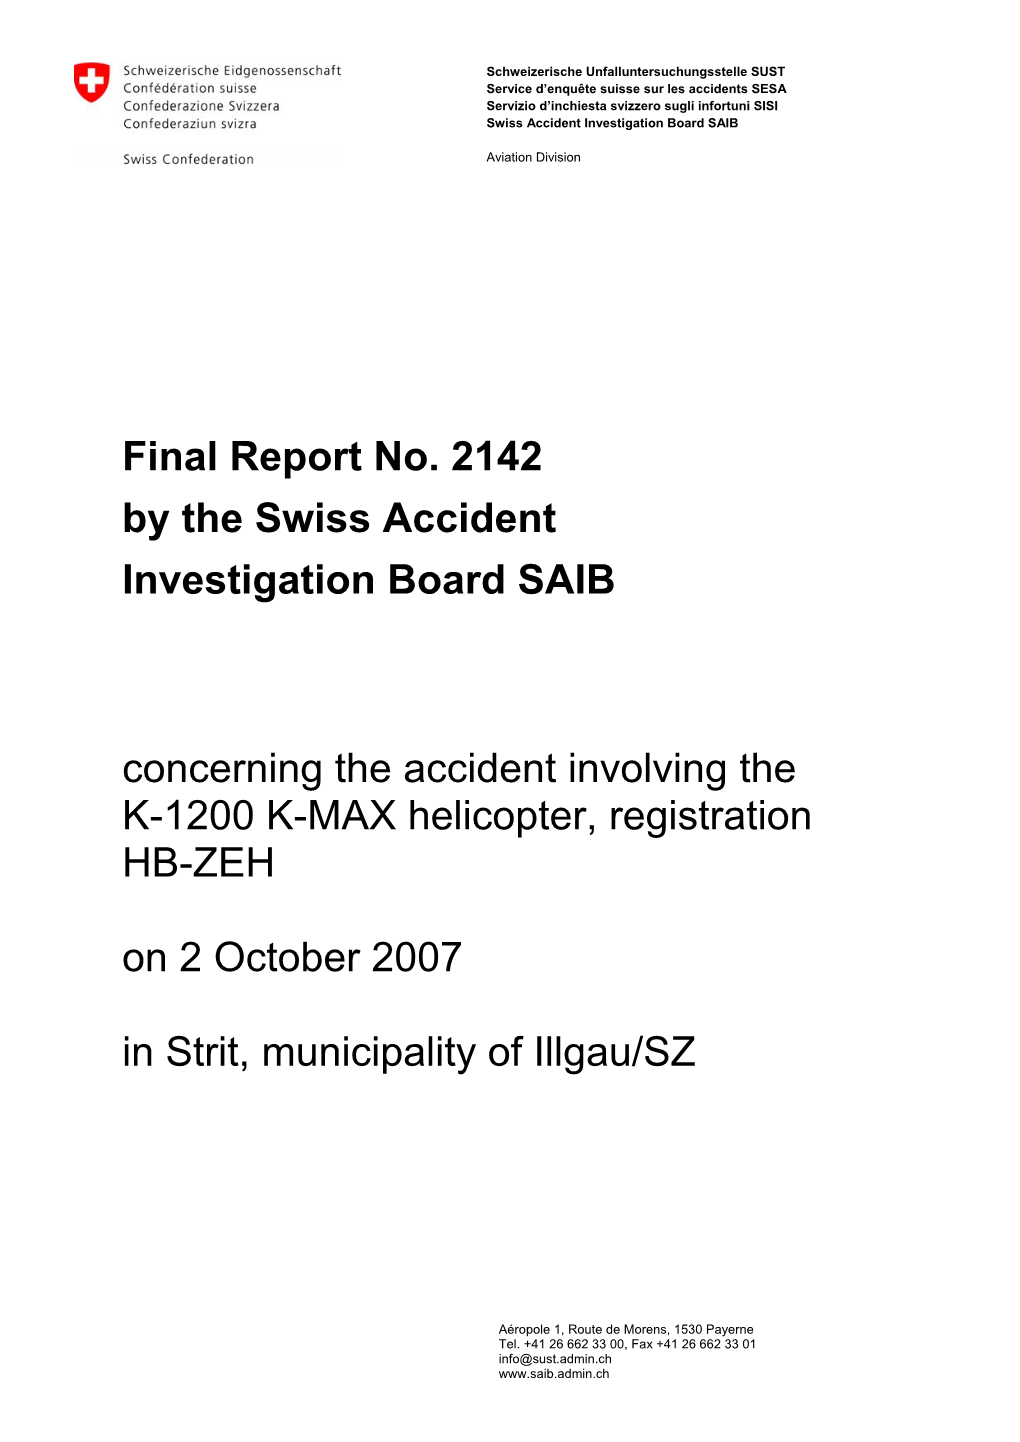 Final Report No. 2142 by the Swiss Accident Investigation Board SAIB Concerning the Accident Involving the K-1200 K-MAX Helicopt